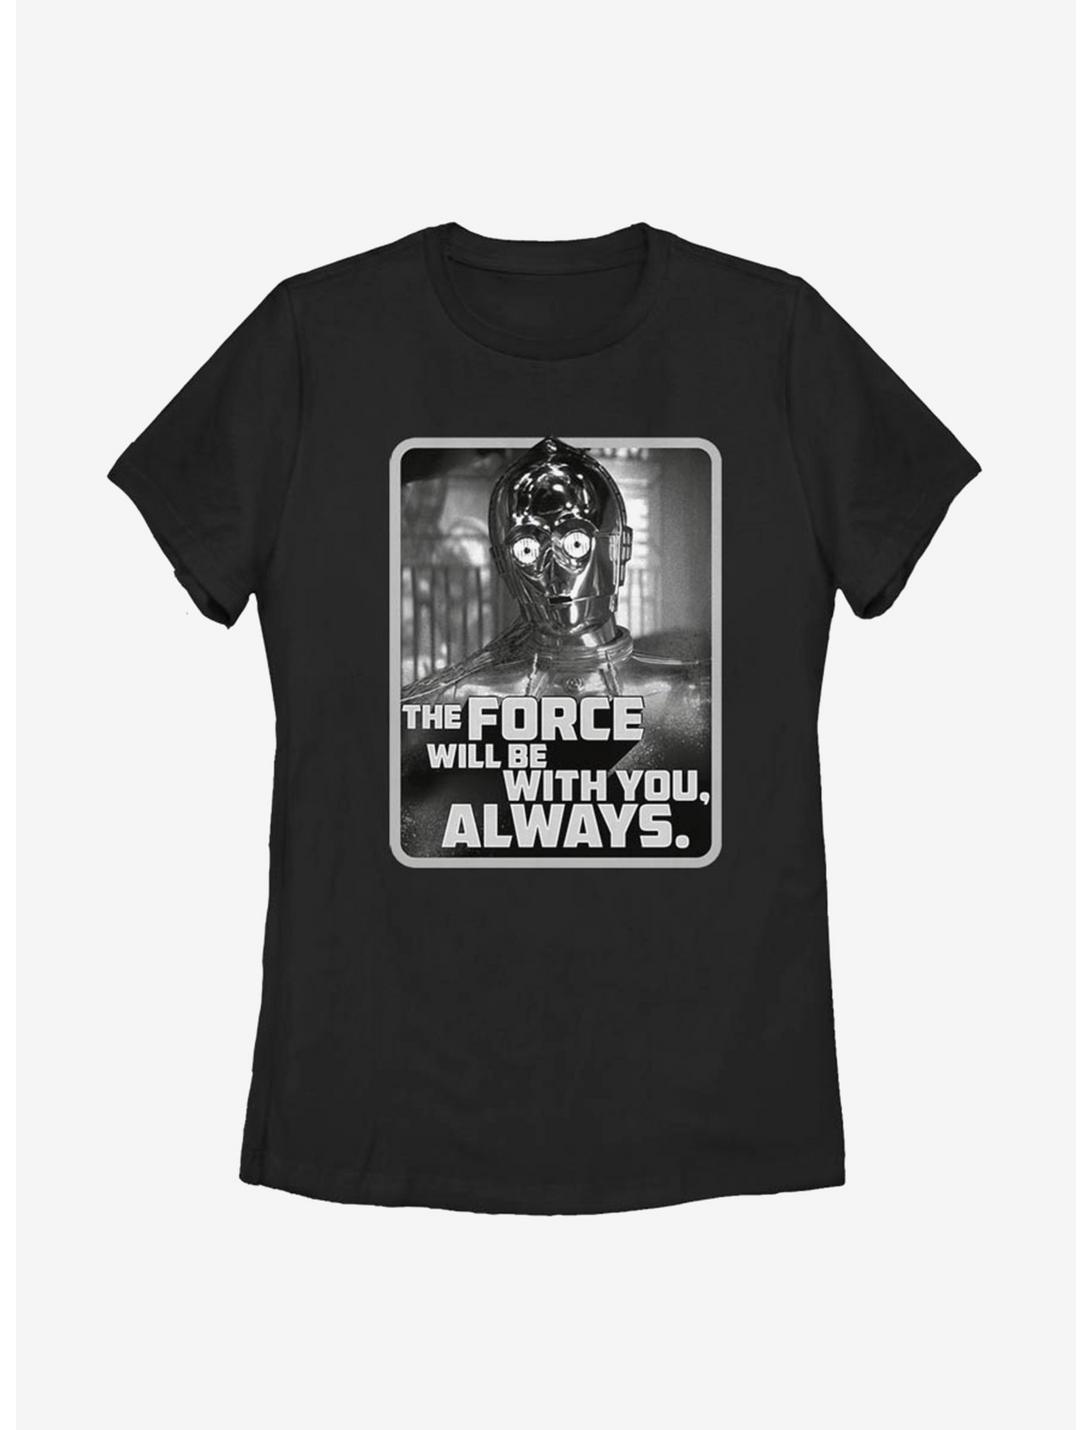 Star Wars Episode IX The Rise Of Skywalker With You C3PO Womens T-Shirt, BLACK, hi-res